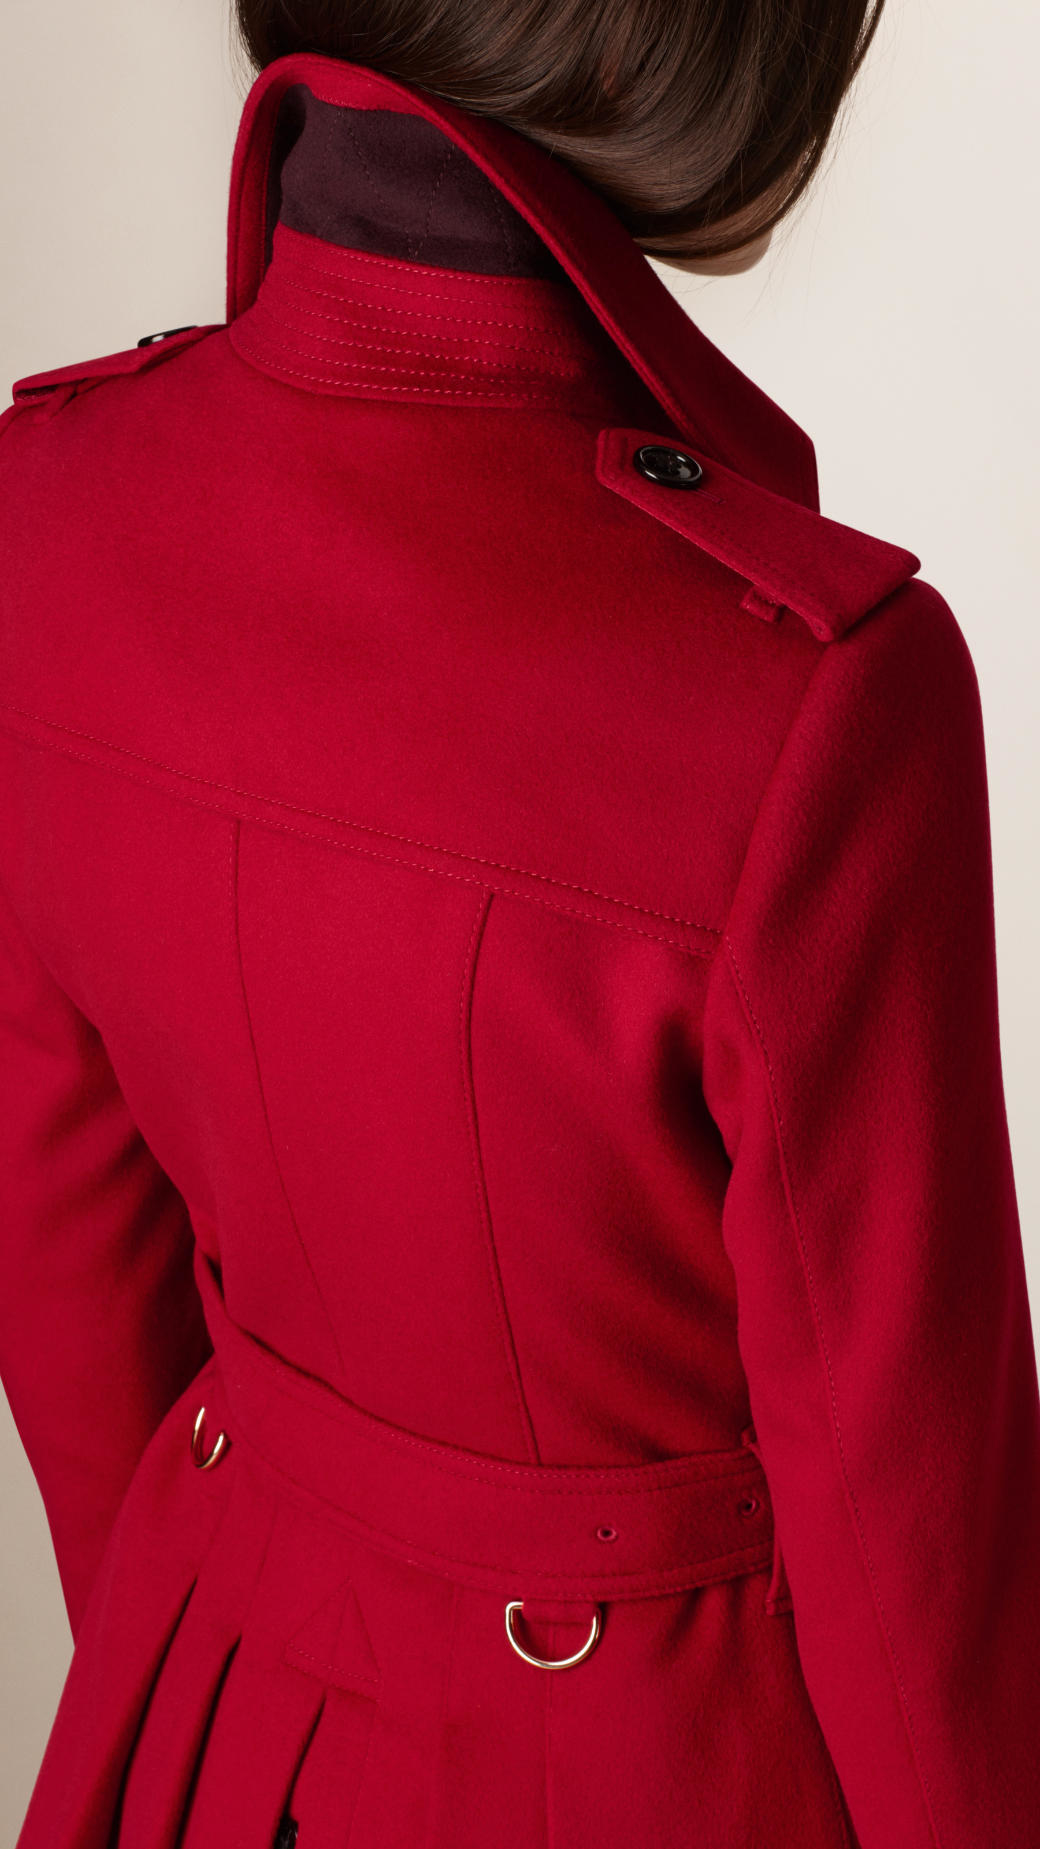 Burberry Pleat Detail Wool Cashmere Trench Coat in Red | Lyst